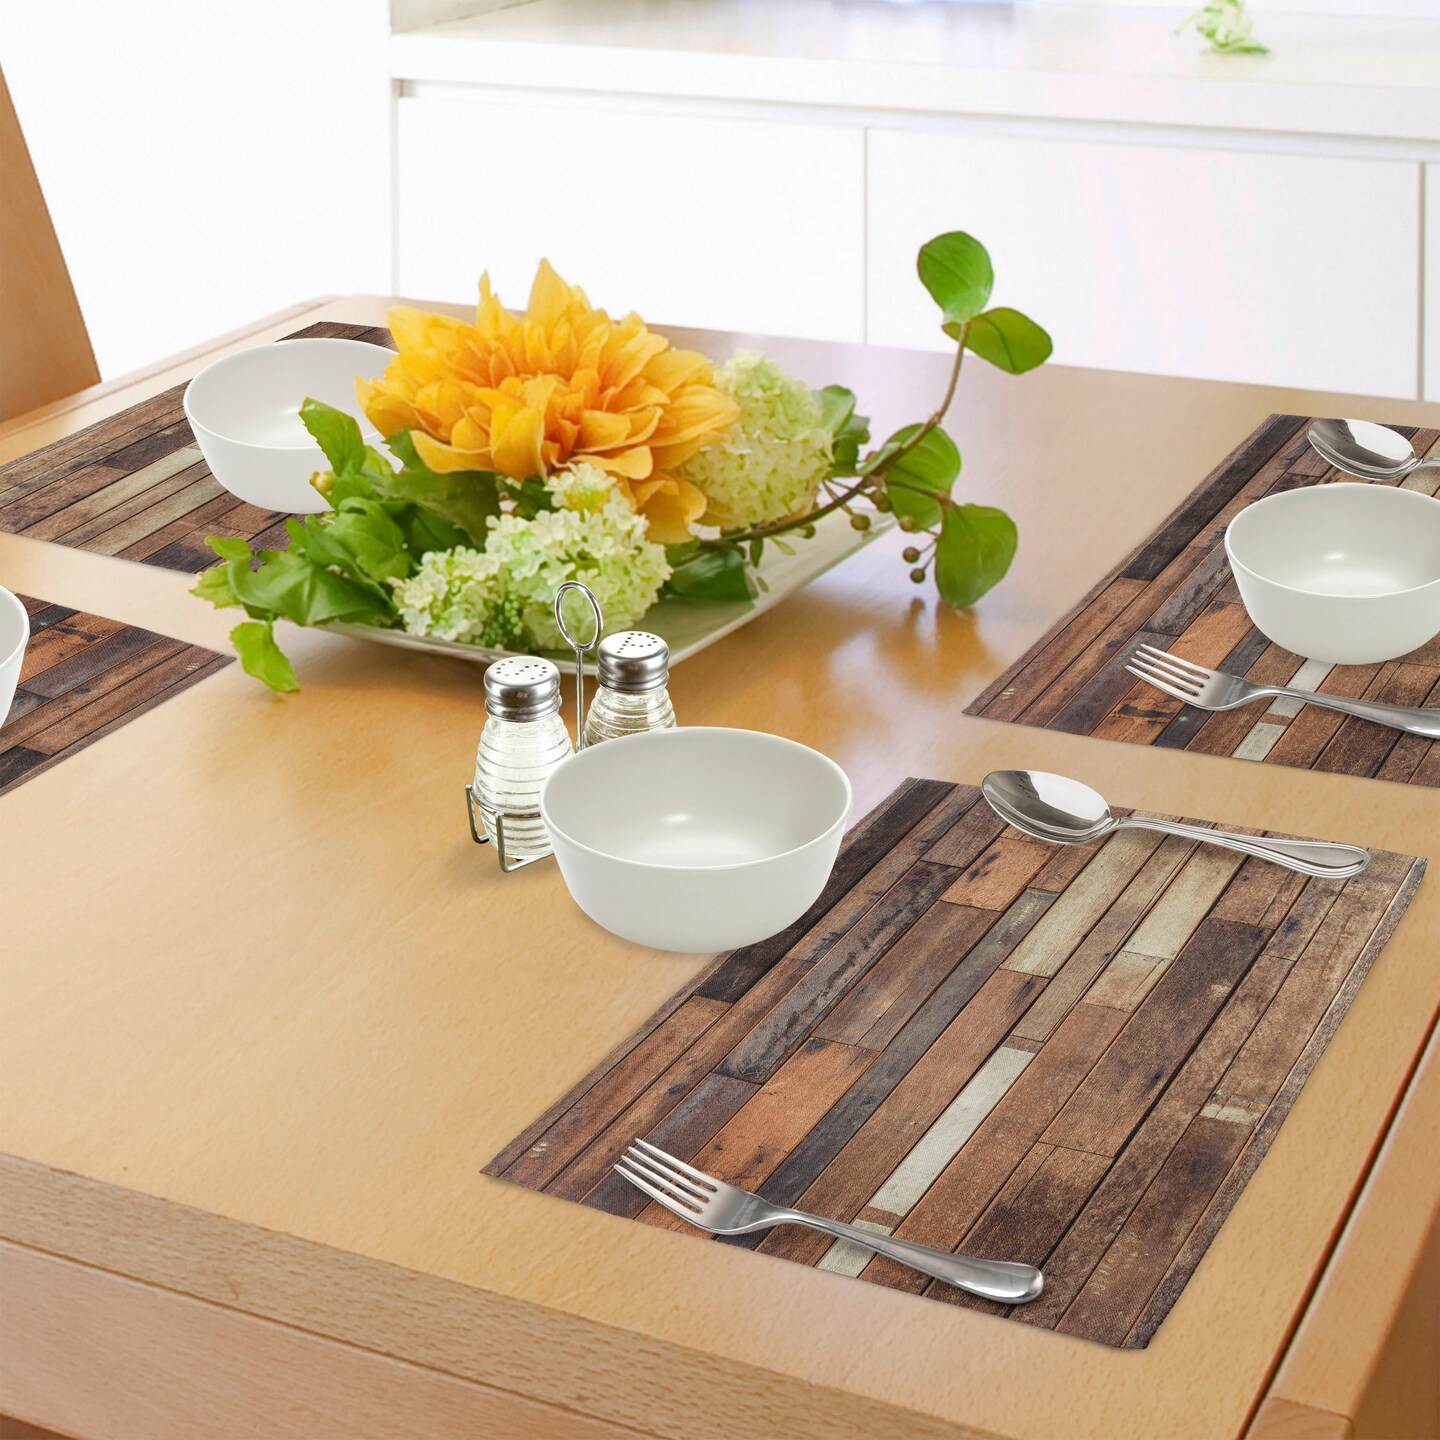 Wooden Placemats Set of 4 Rustic Floor Planks Print Grungy Look Farm House  Country Style Walnut Oak Grain Image, Washable Fabric Place Mats for Dining  Room Kitchen Table Decor,Brown, by Ambesonne 